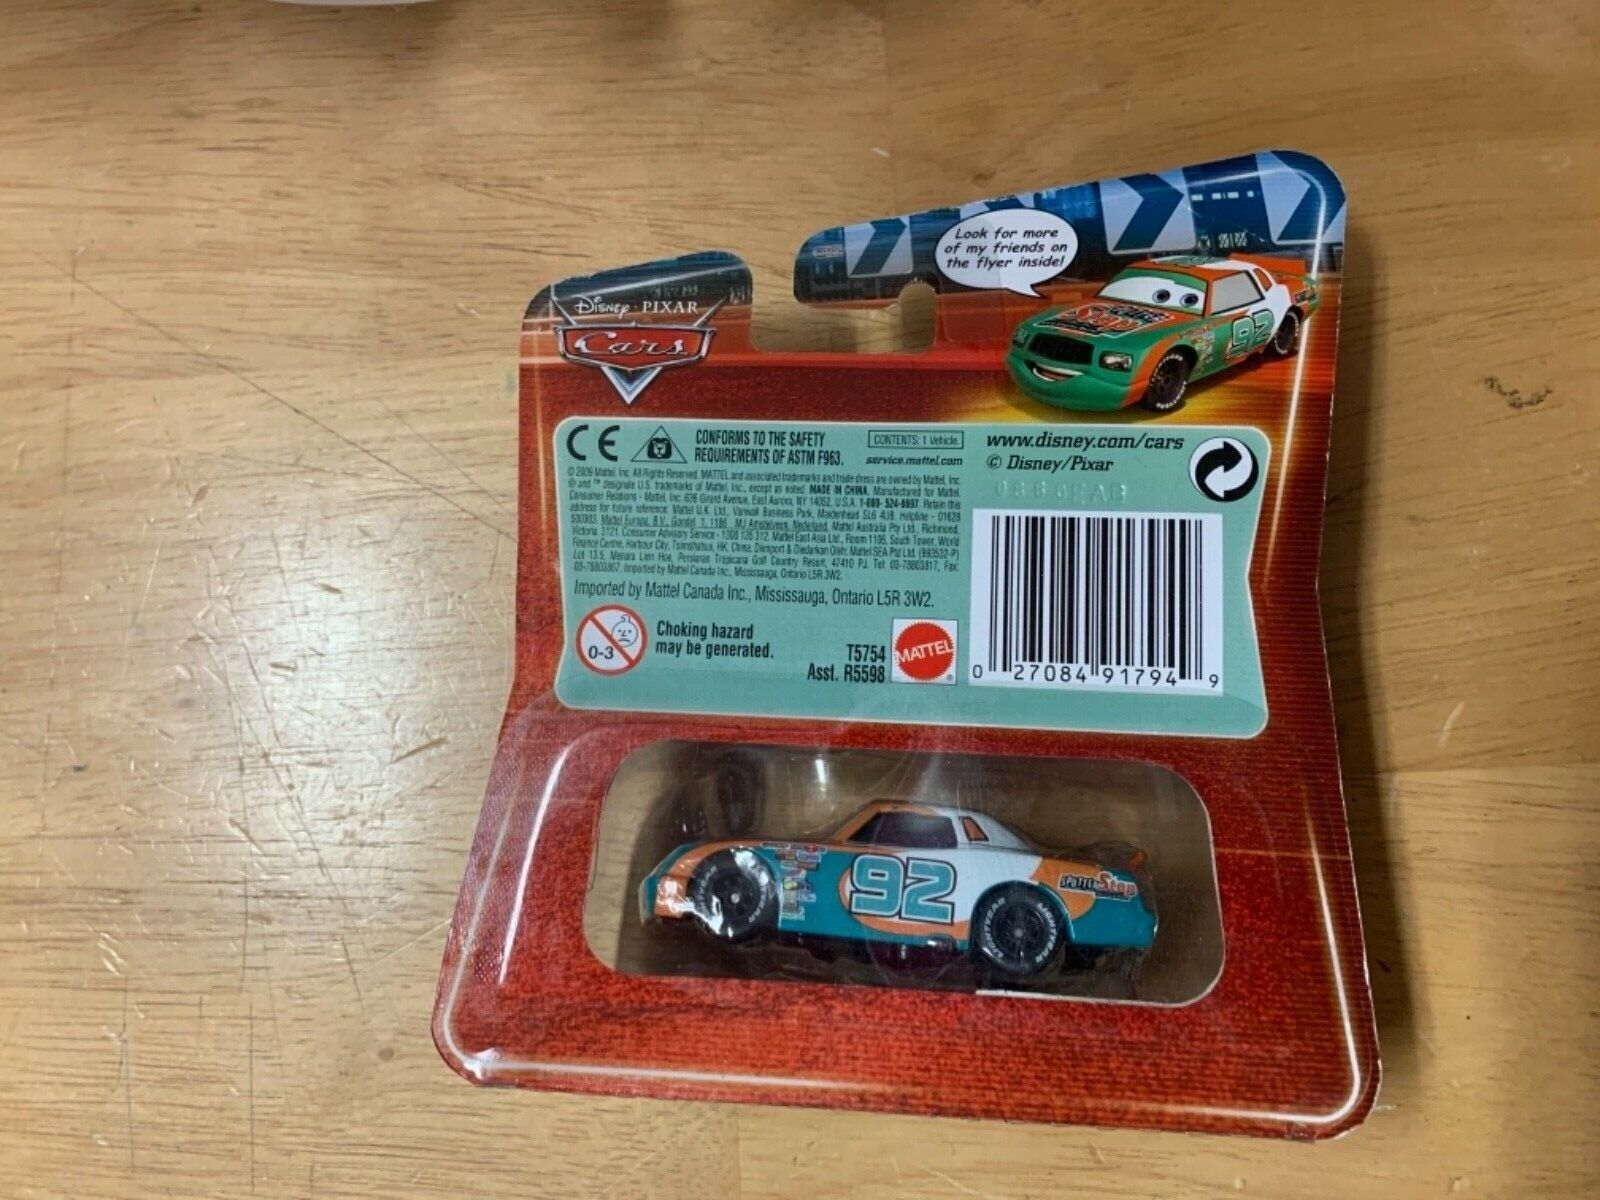 Disney Pixar Cars Synthetic Rubber Tires Opened Sputter Stop No. 92